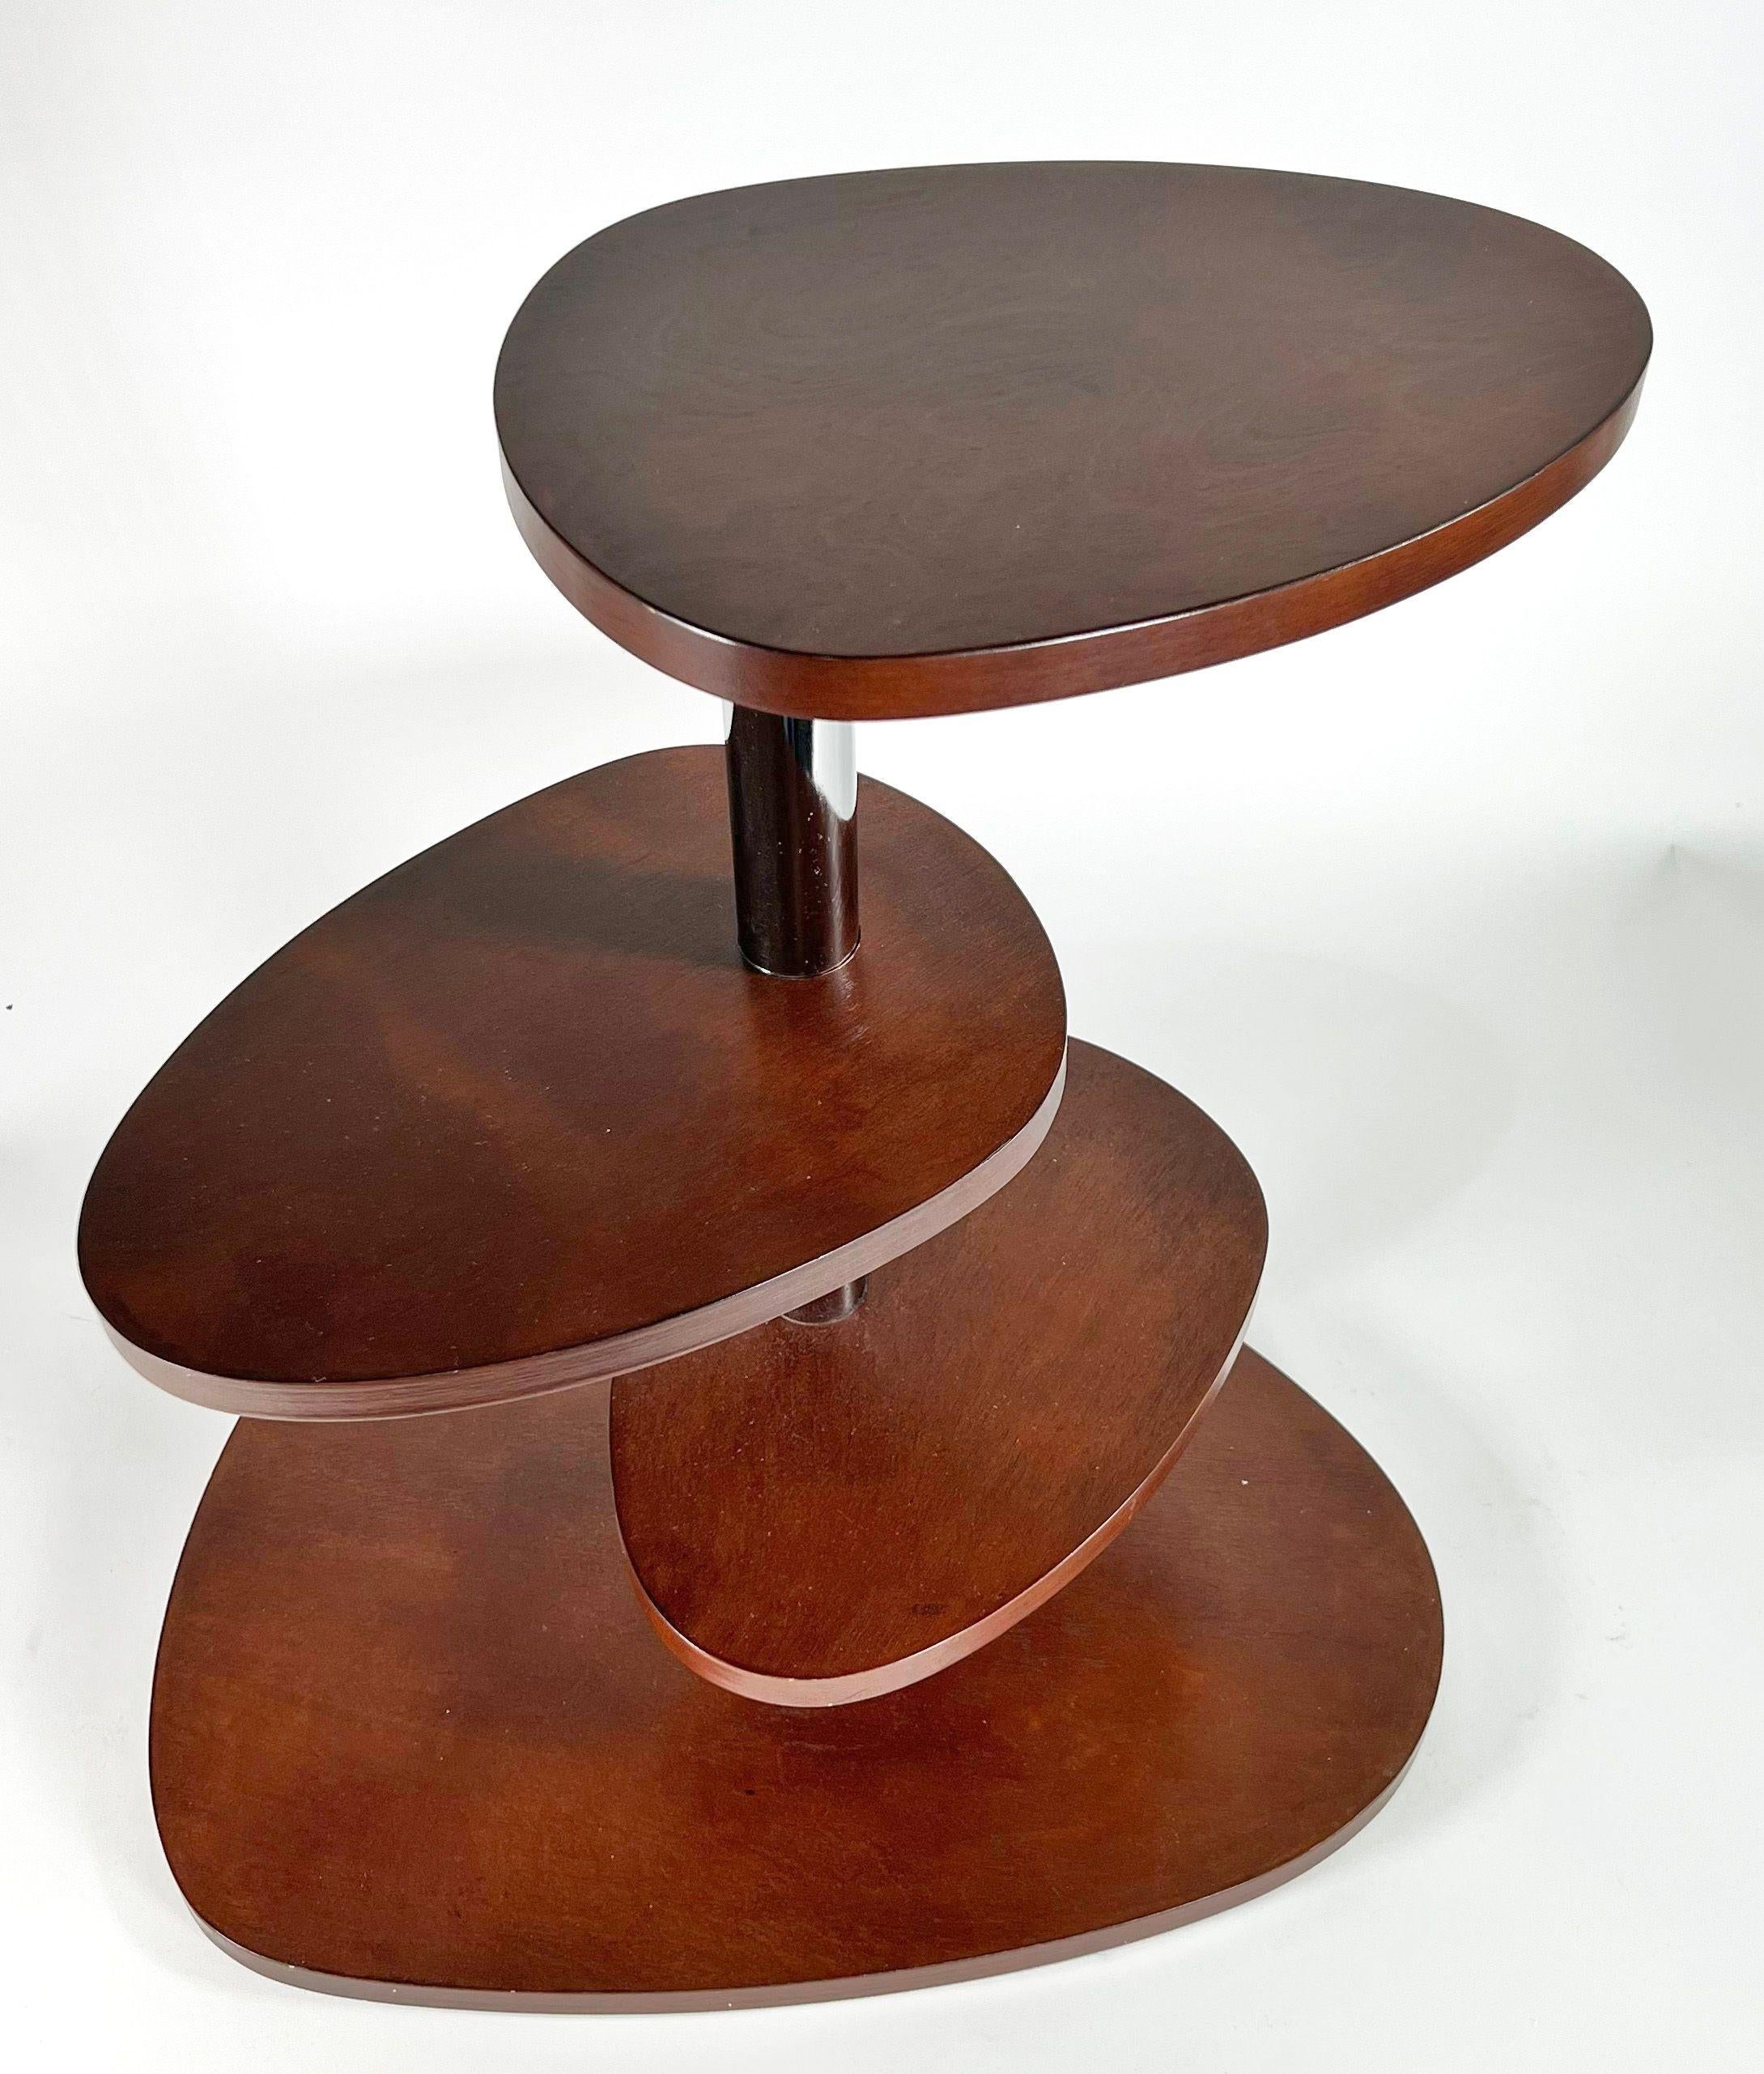 French Modern Mahogany 4 Tier Pivoting Mexique Table, Style Charlotte Perriand For Sale 2